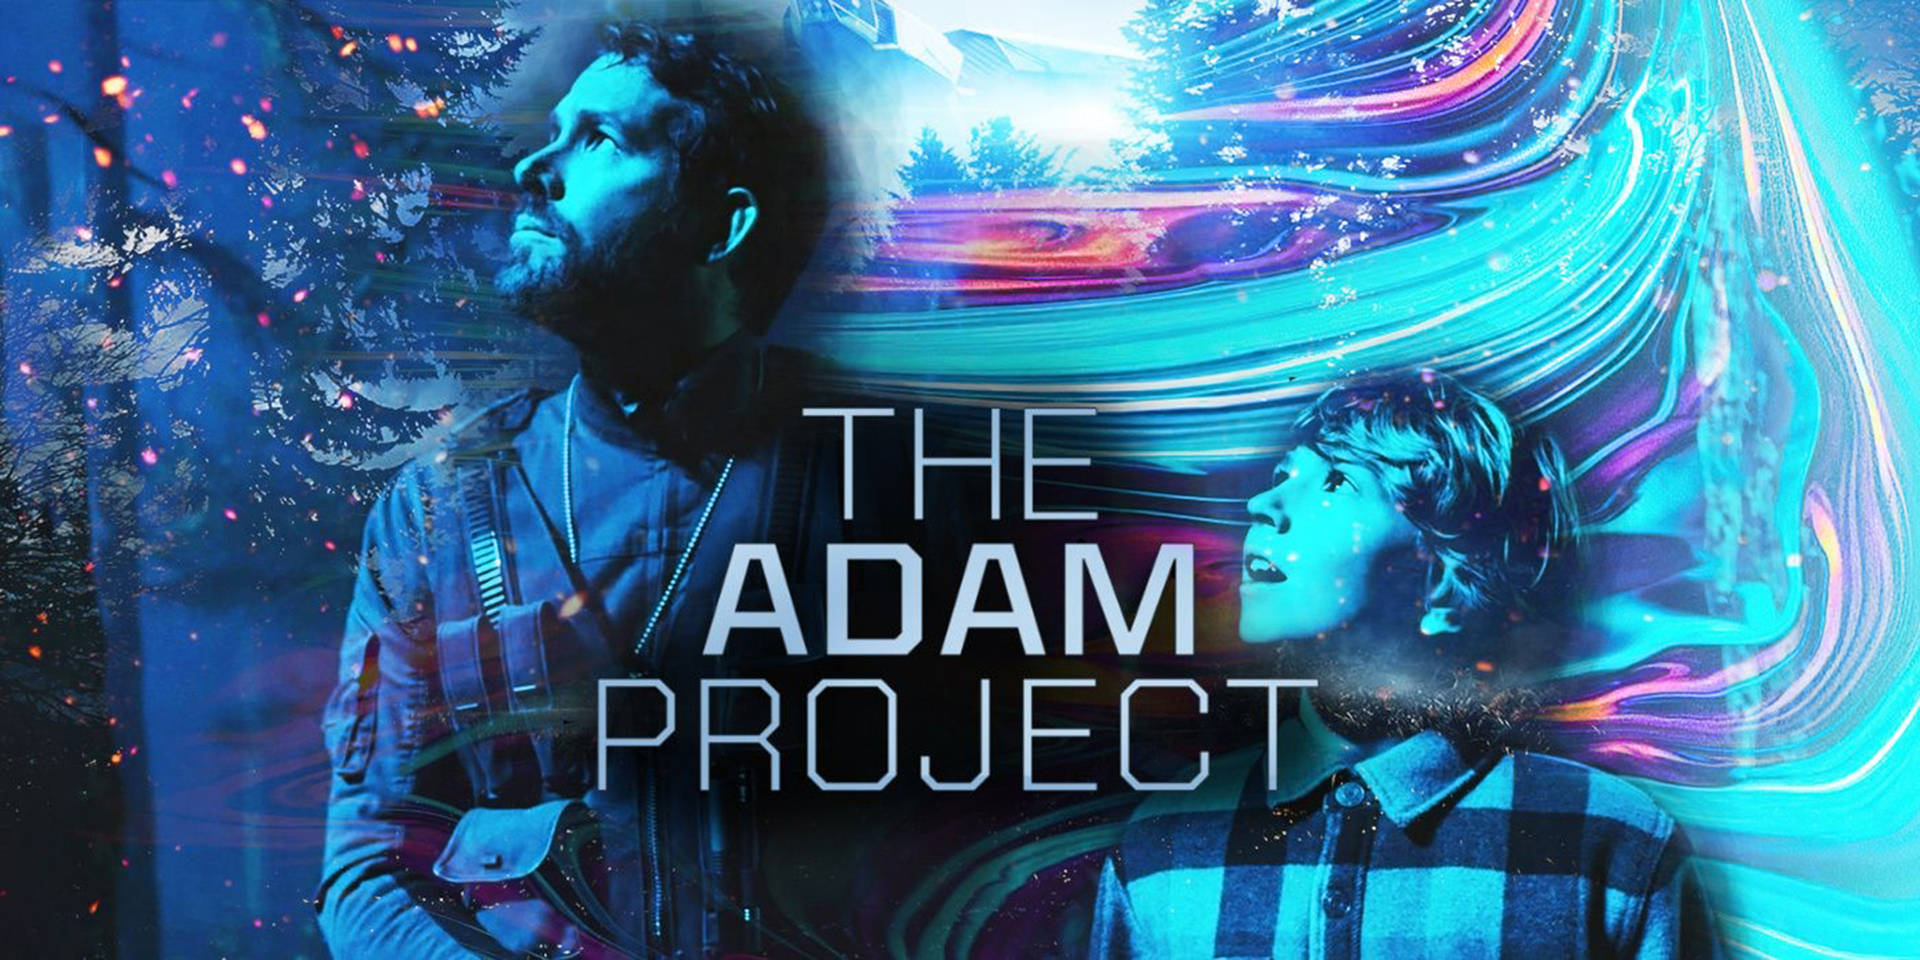 The Adam Project Abstract Art